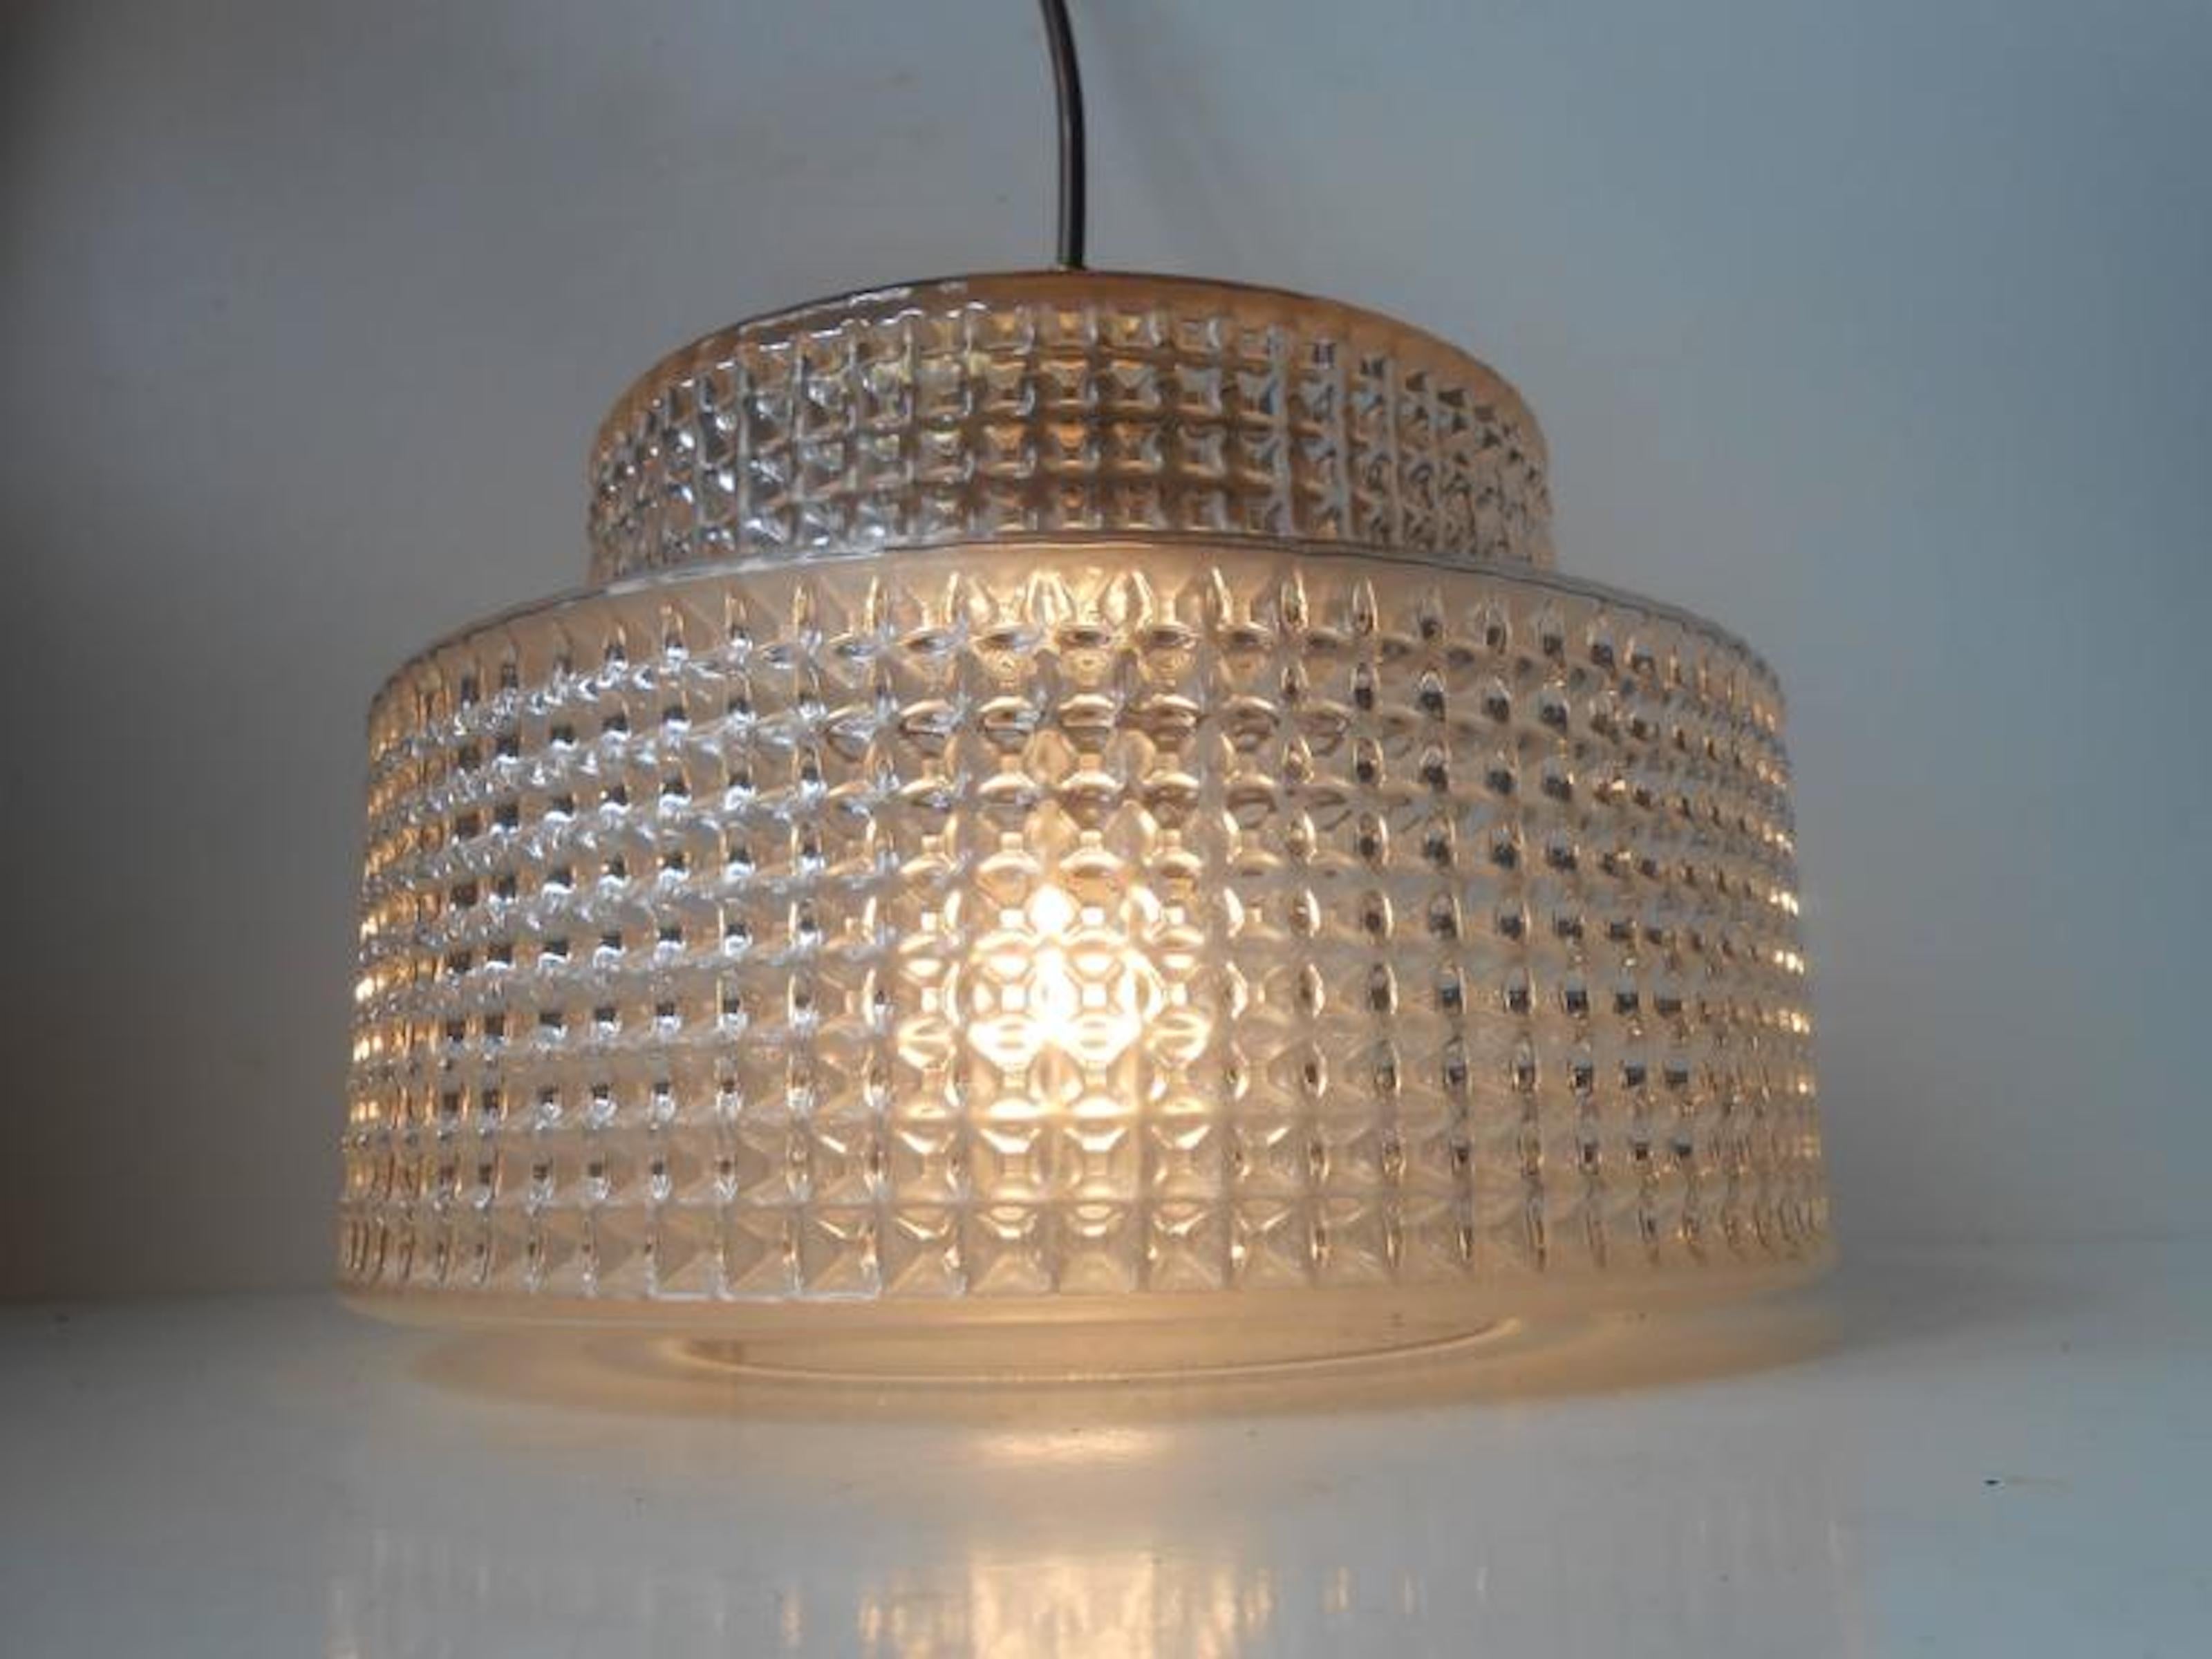 This pendant light was designed and manufactured by Danish design trio Vitrika in the 1960s. The name Vitrika, or Vi-Tri-Ka means 'The three of us can do it'. The lamp features a geometric - diamond patterned clear glass shade. The socket and tube